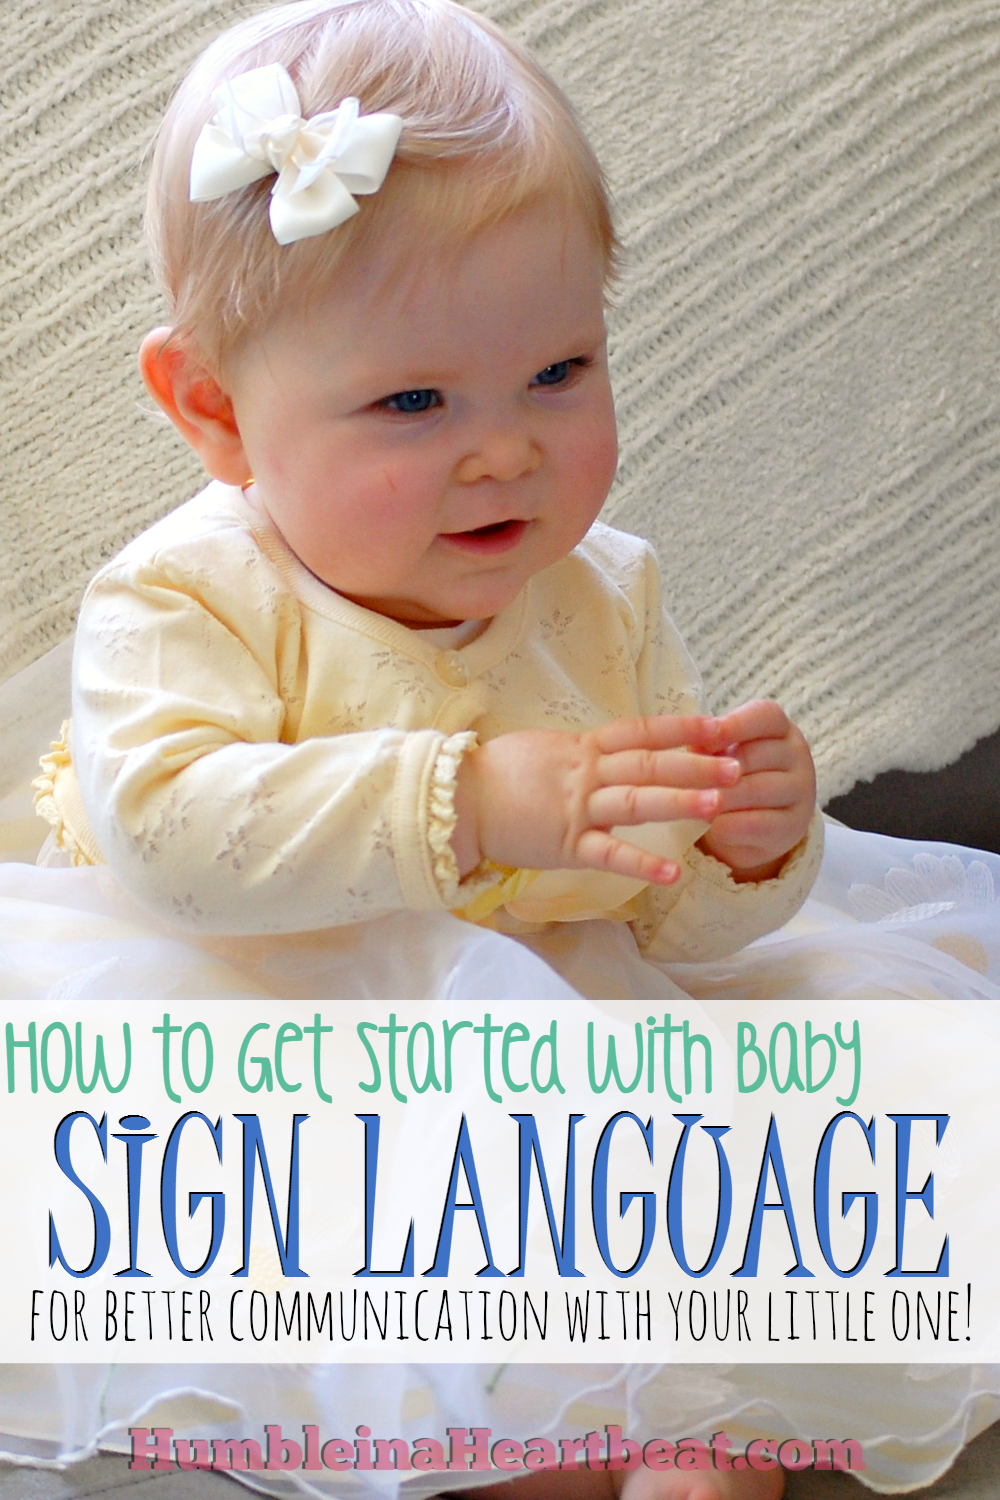 Baby sign language has so many great advantages and it's super easy to learn and teach. Get started today with this list of great resources you and your baby will love!